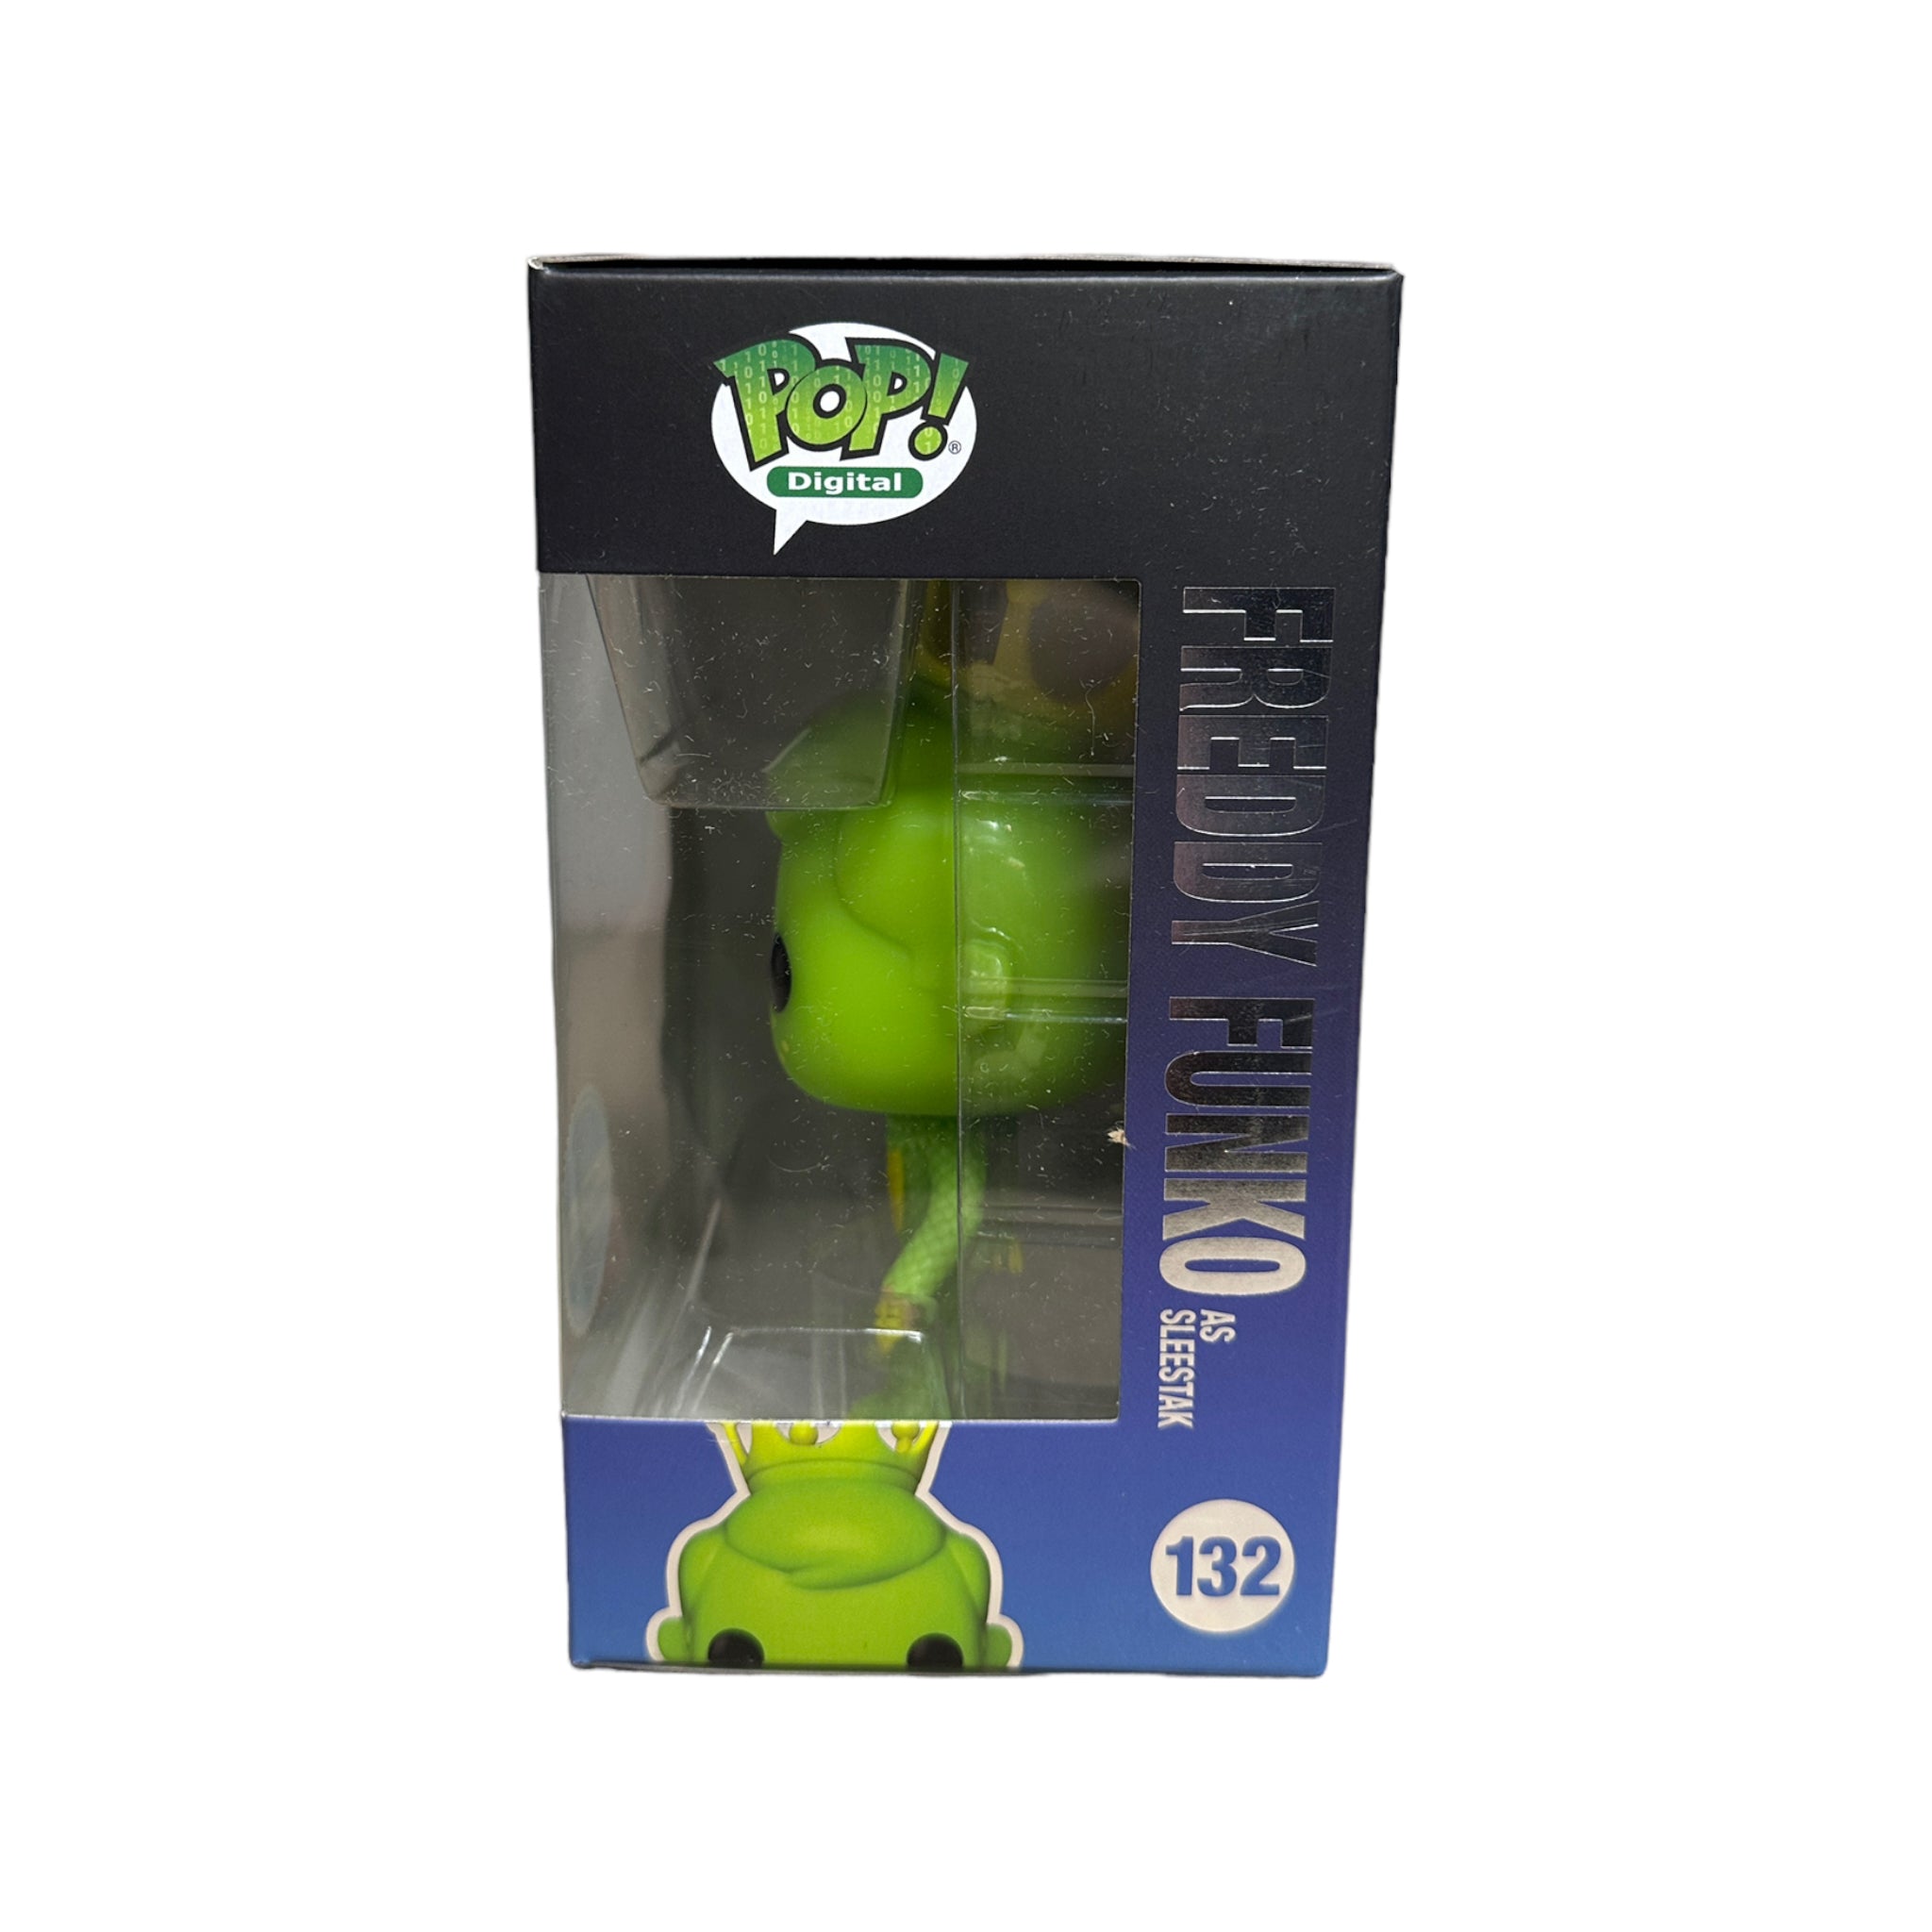 Freddy Funko as Sleestak #132 Funko Pop! - Sid & Marty Krofft Pictures - NFT Release Exclusive LE2700 Pcs - Condition 8.75/10